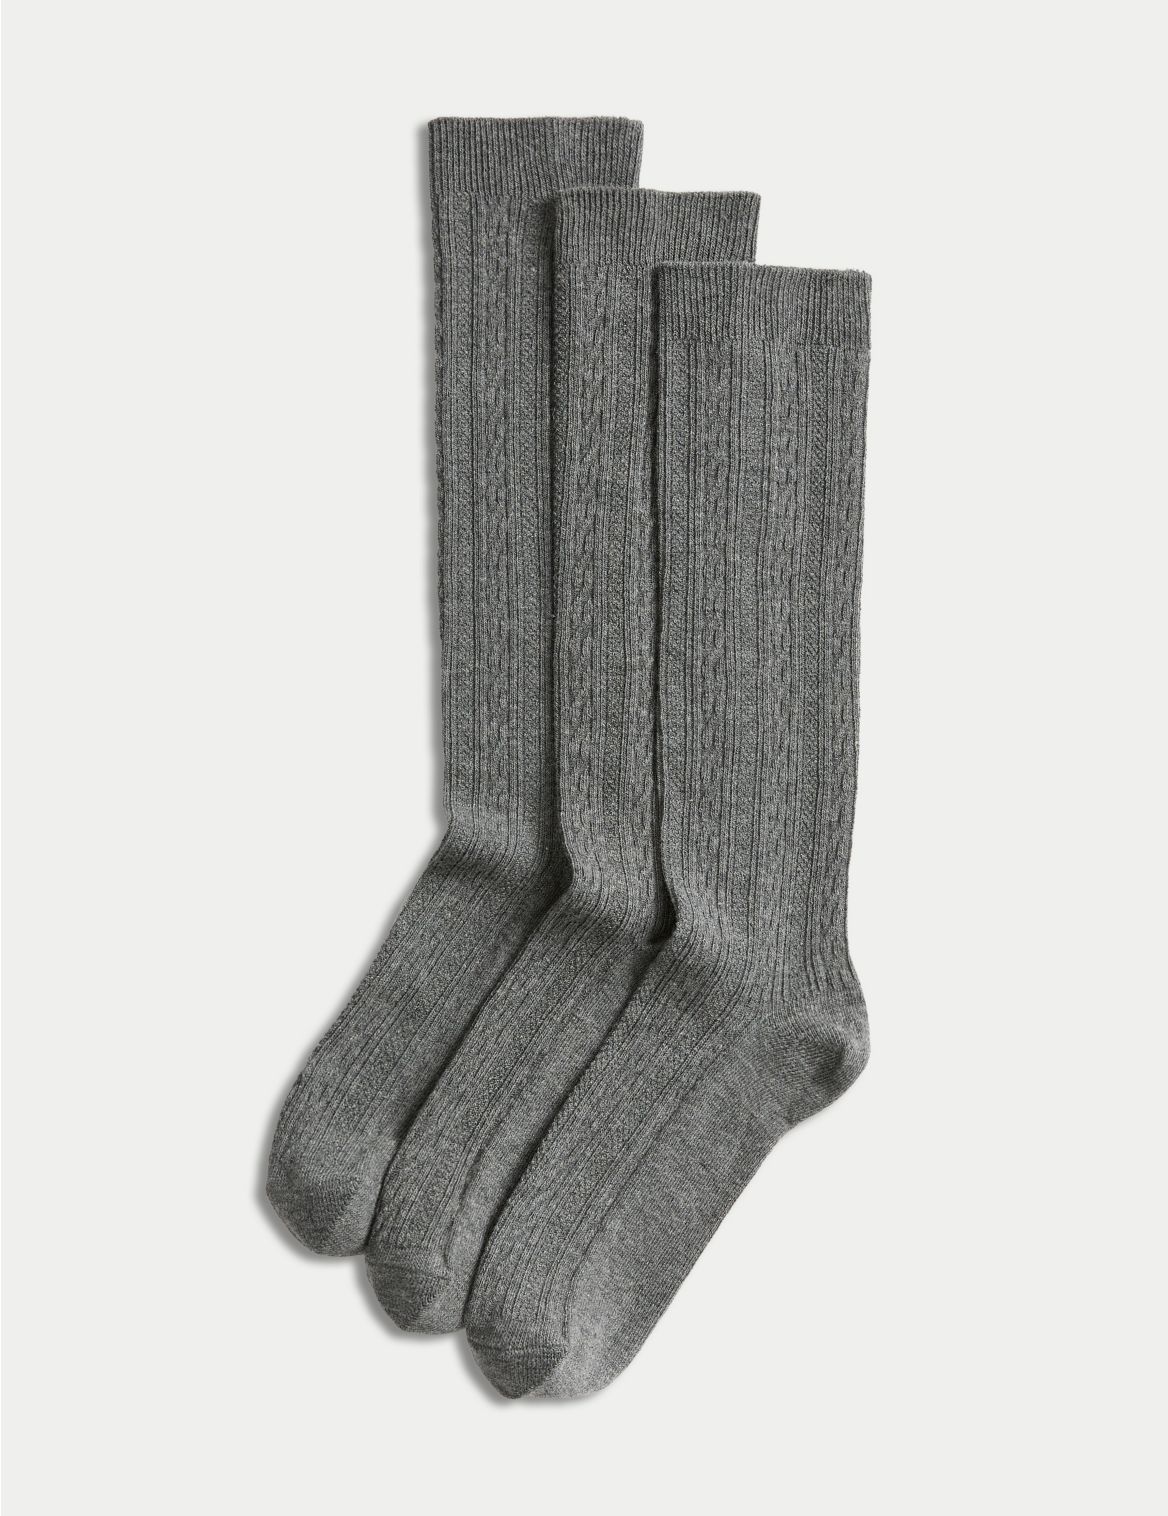 3pk of Cable Knee High Socks grey